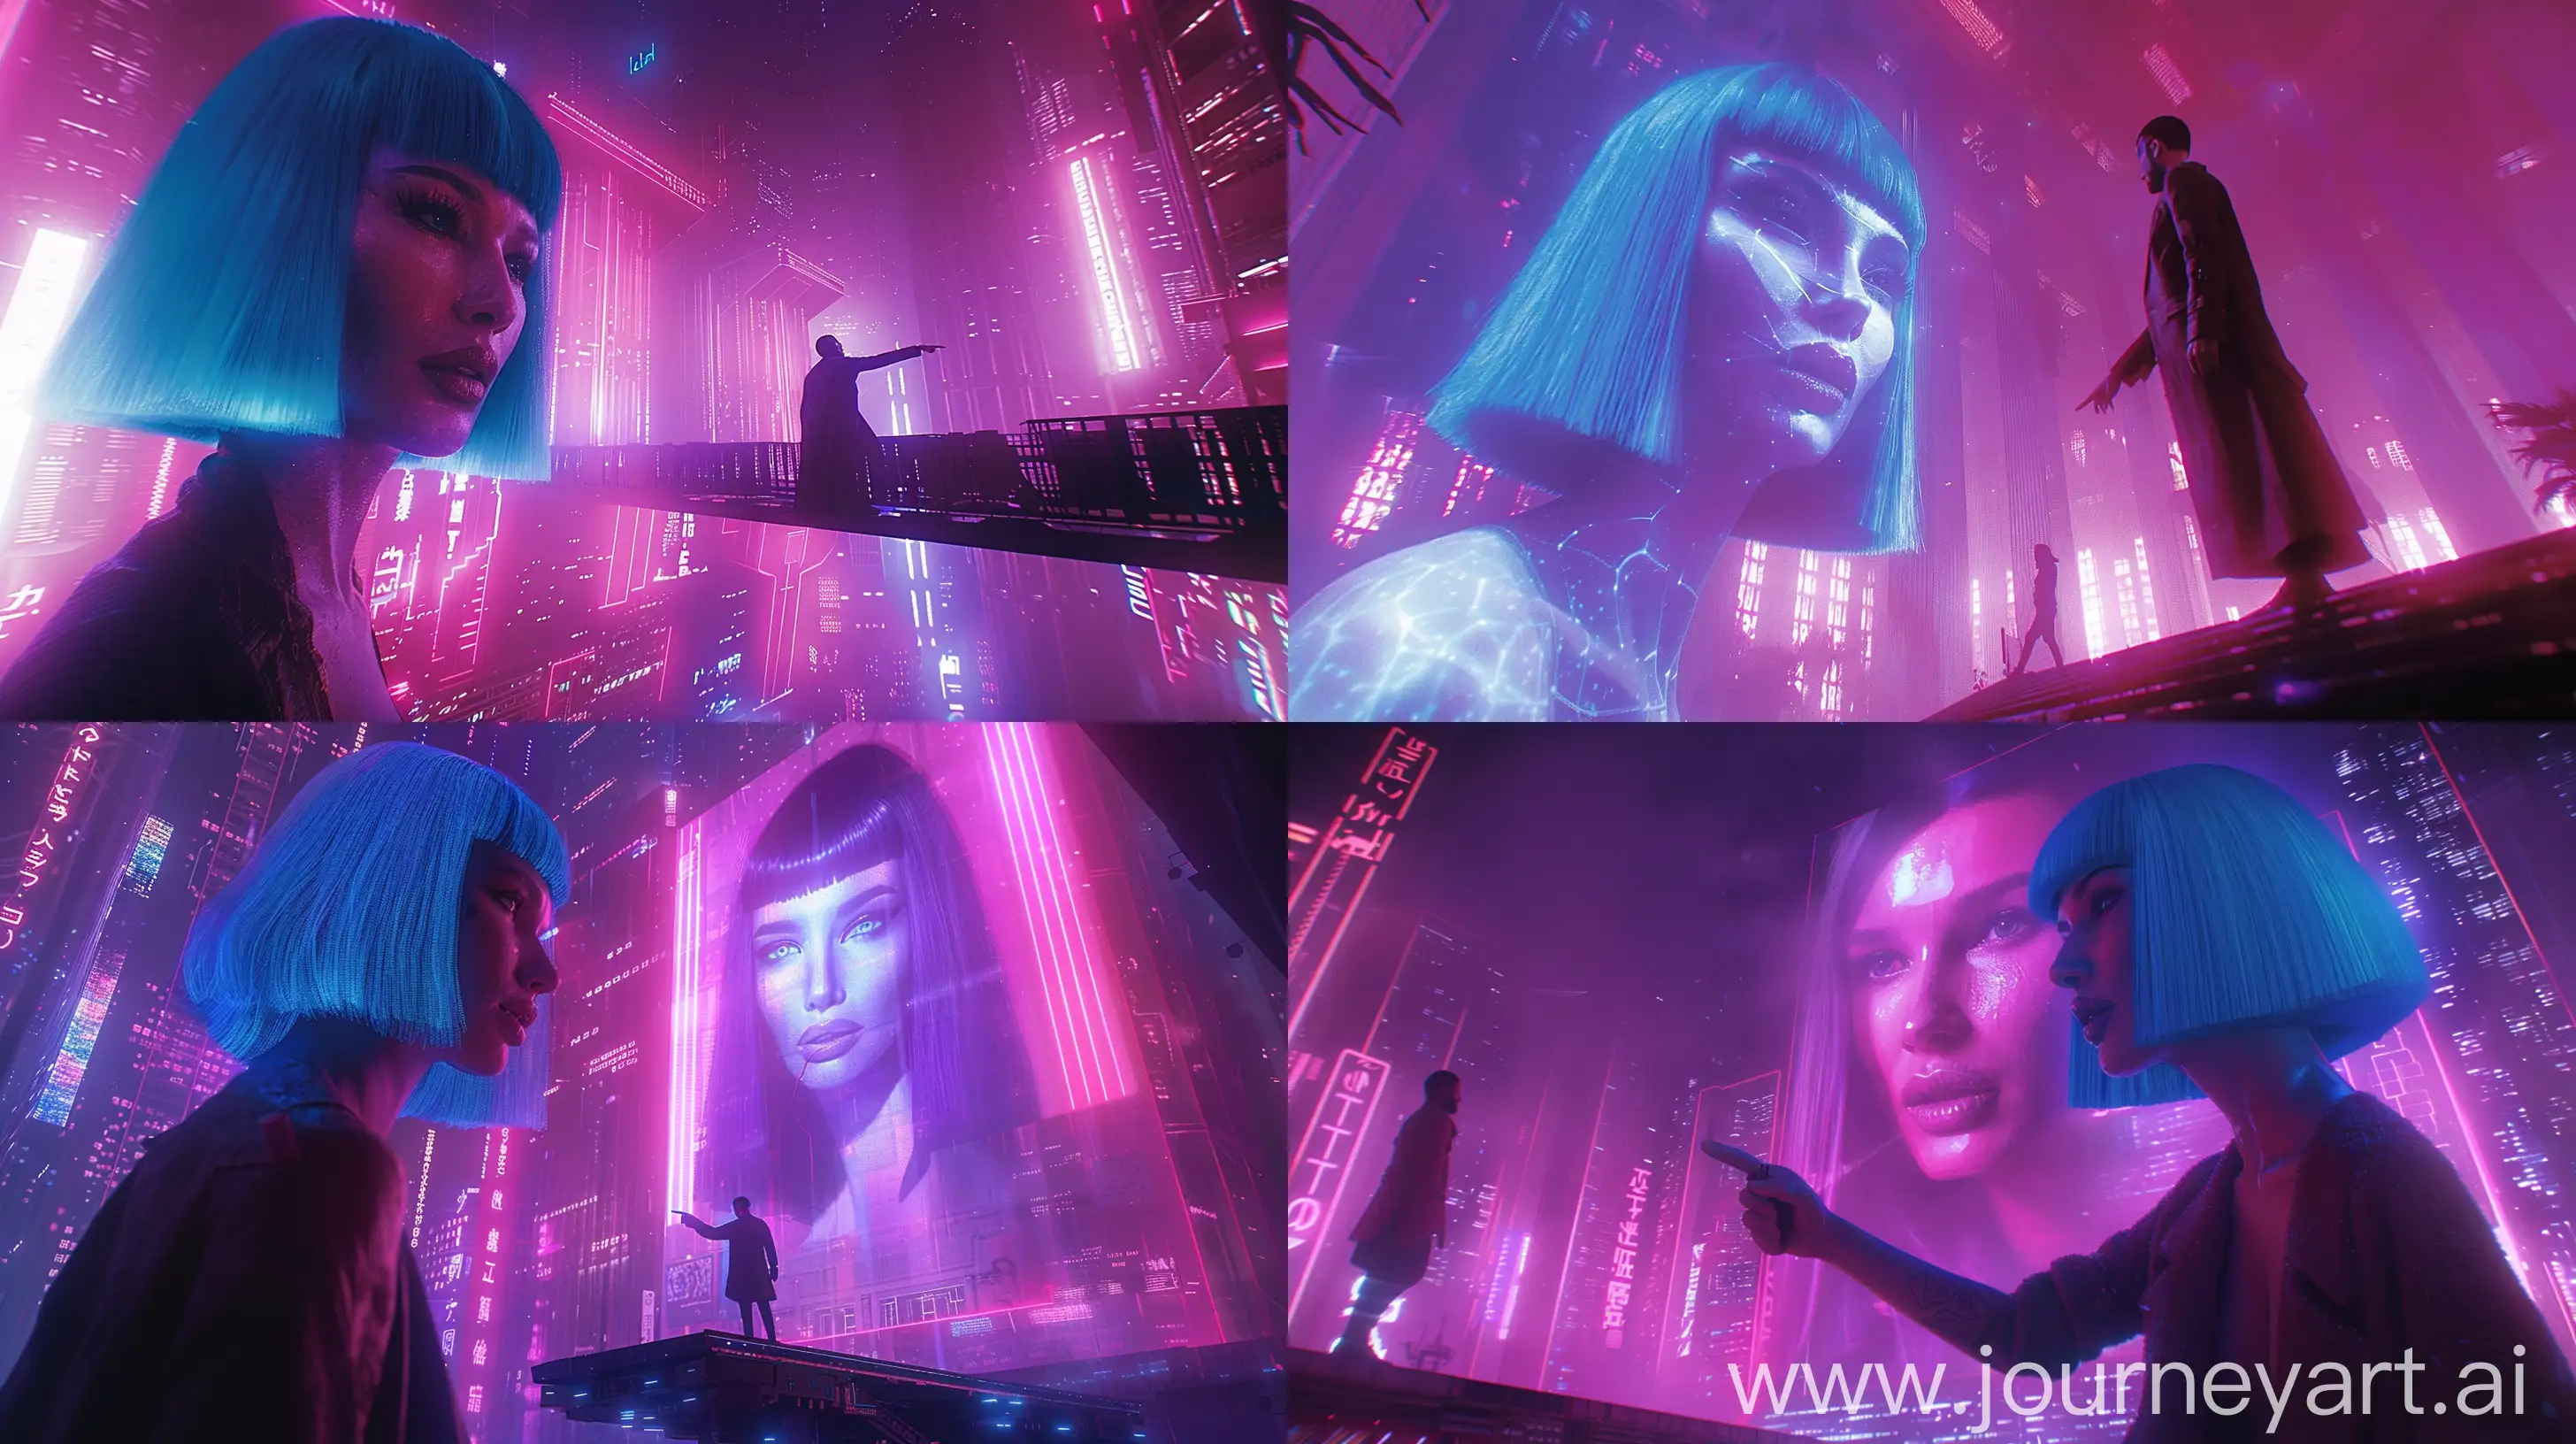 Futuristic cyberpunk cityscape with a larger-than-life holographic woman with neon blue bob hair, pointing at a man on a platform, neon purple and pink hues, soft lighting, man in a long coat, realistic detailed hologram, dreamlike atmosphere, human-Al relationship theme, glowing textures, surreal scale contrast --cref https://cdn.discordapp.com/attachments/1200713789763485788/1241049142487416924/1f5e385f802b4c22bebaa56d6b1a005a.jpg?ex=66497155&is=66481fd5&hm=7b923abb9b74e234aa58505802069cd19b226b381abb5c2fe0f7b89b88d060b8& --cw 100 --ar 16:9 --s 750 --v 6 